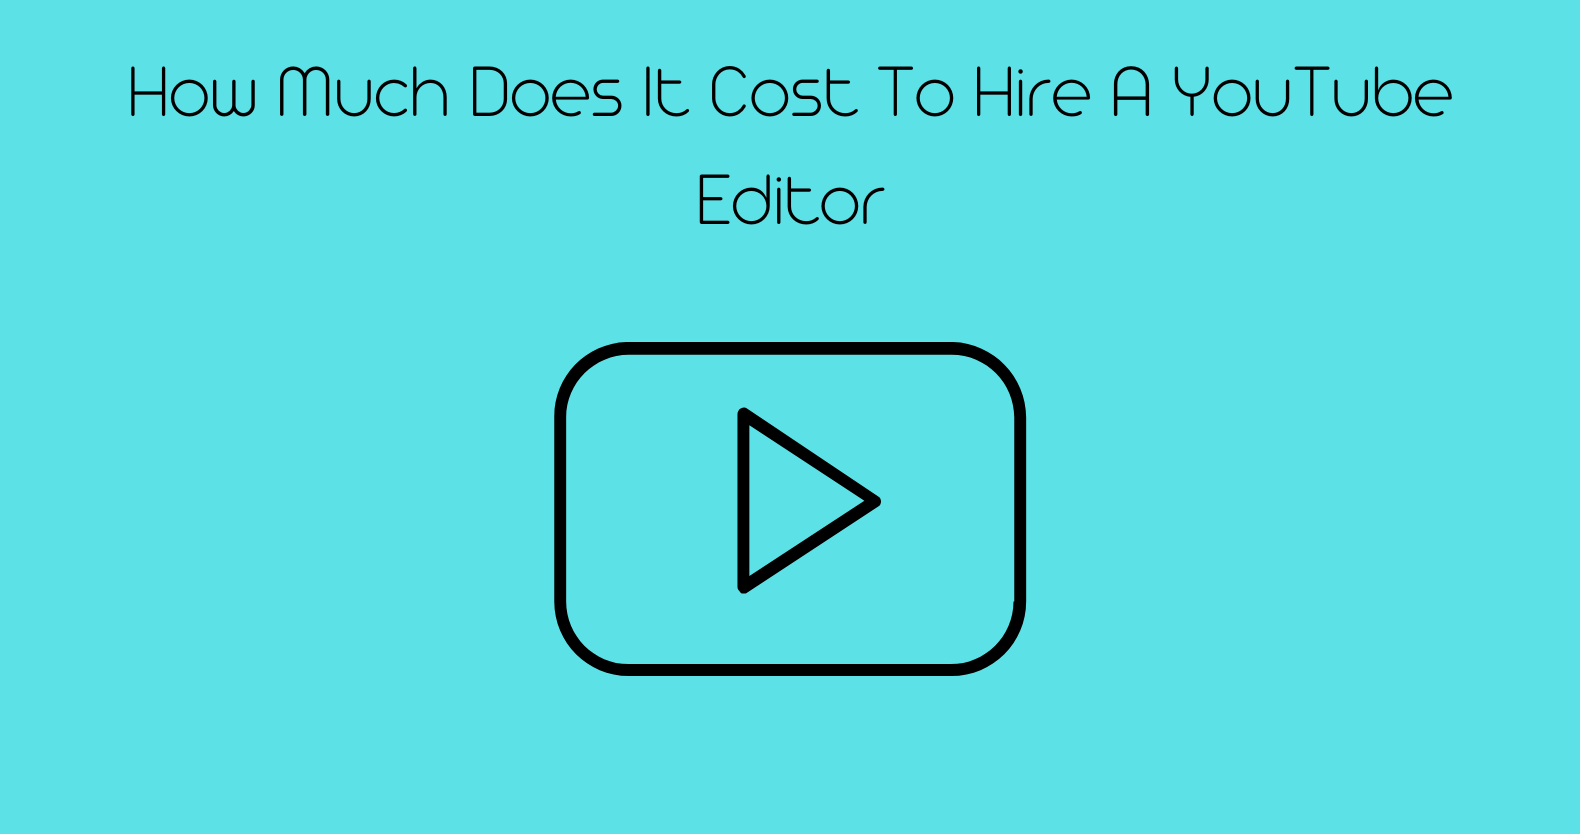 How Much Does It Cost To Hire A YouTube Editor